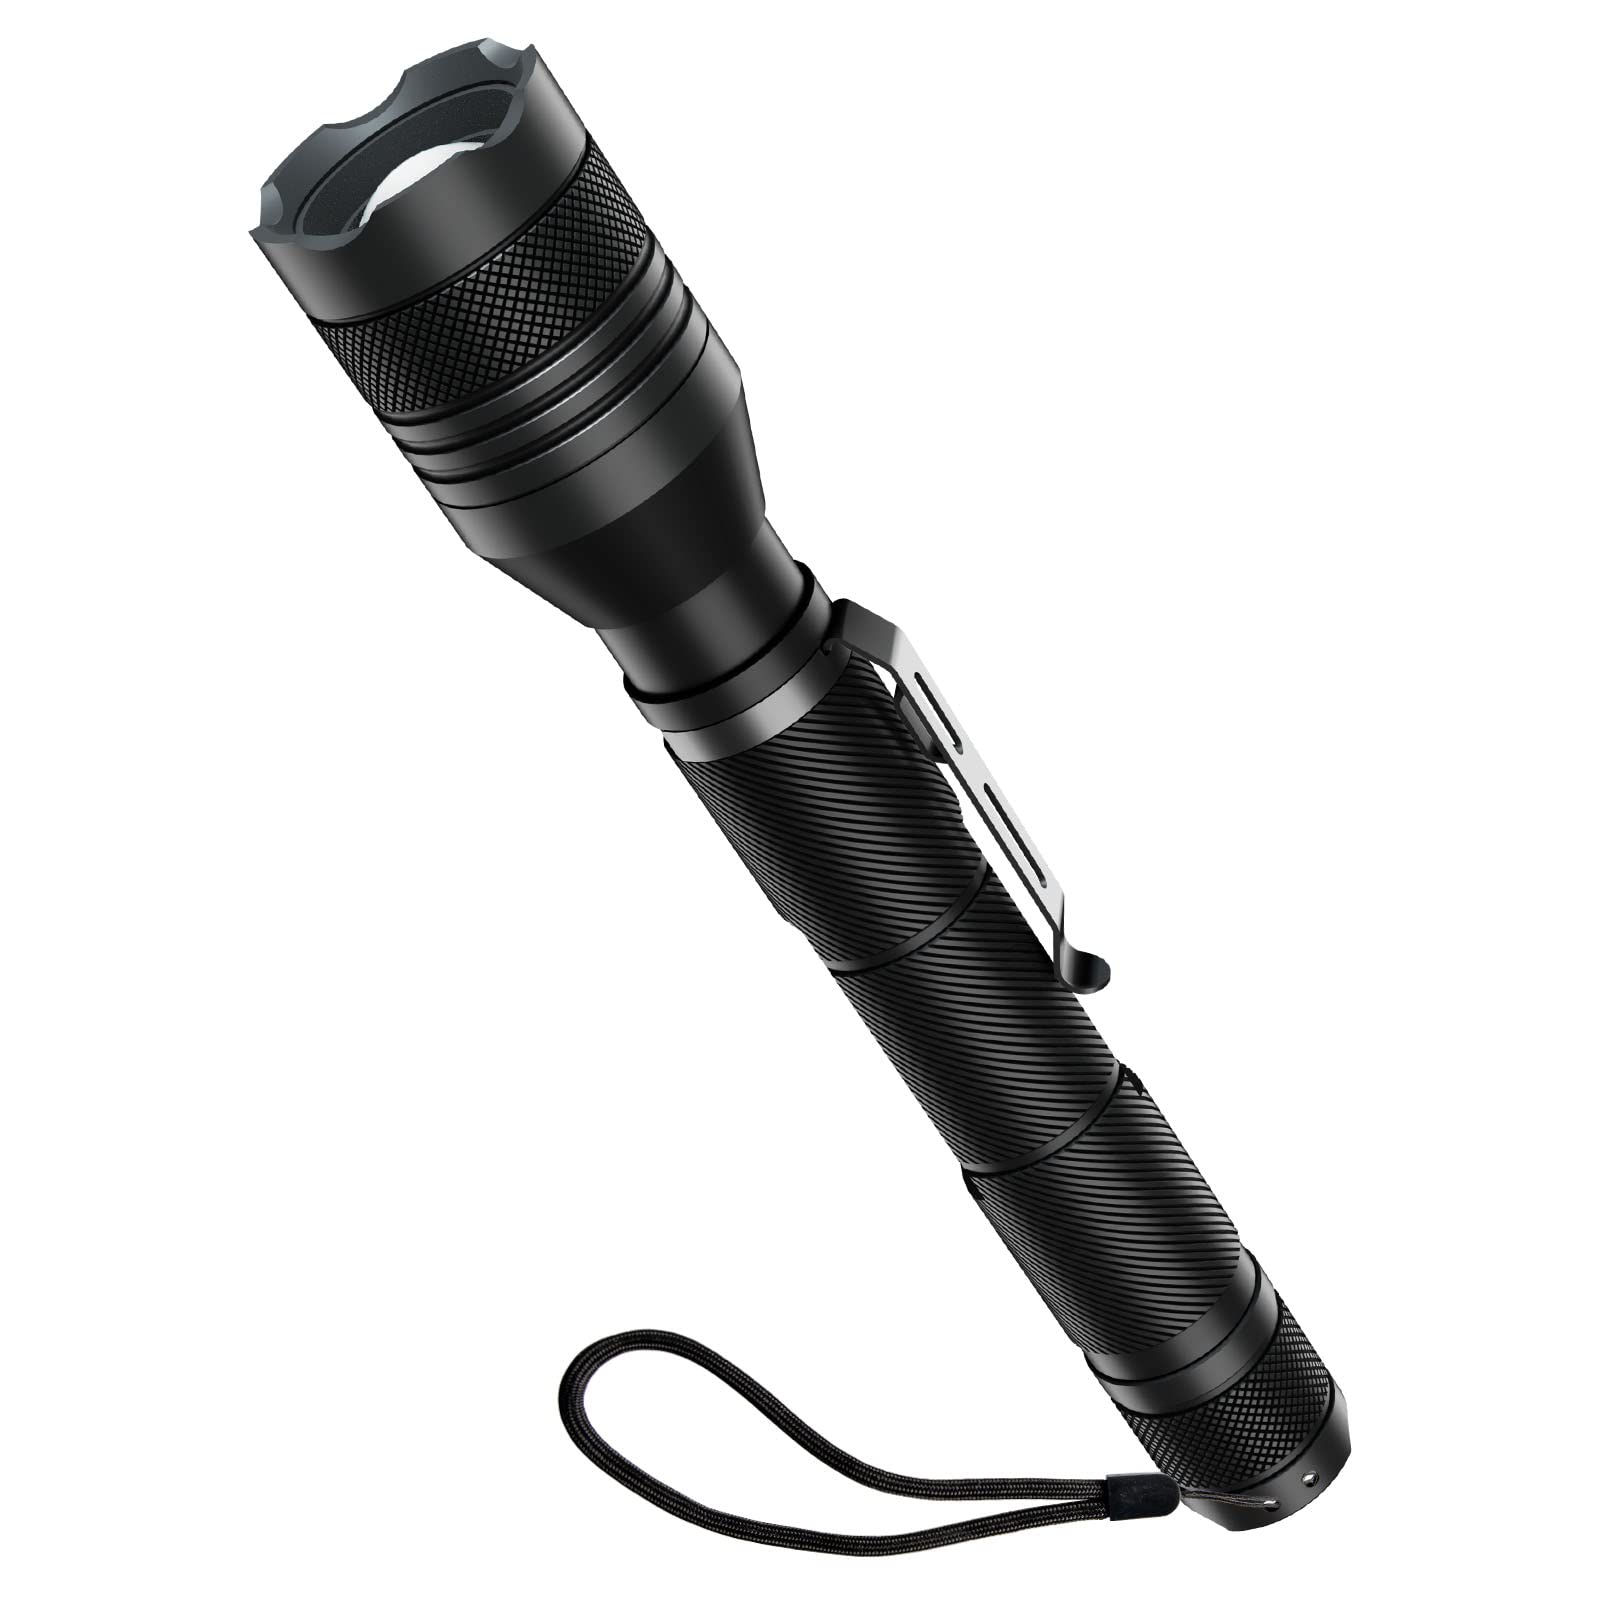 Led Torch, Mowetoo Torches Led Super Bright Flashlight,Camping Torch Flashlight High Brightness Powerful 1500 Lumens,Waterproof, 5 Modes Zoomable Tactical Flashlight for Camping